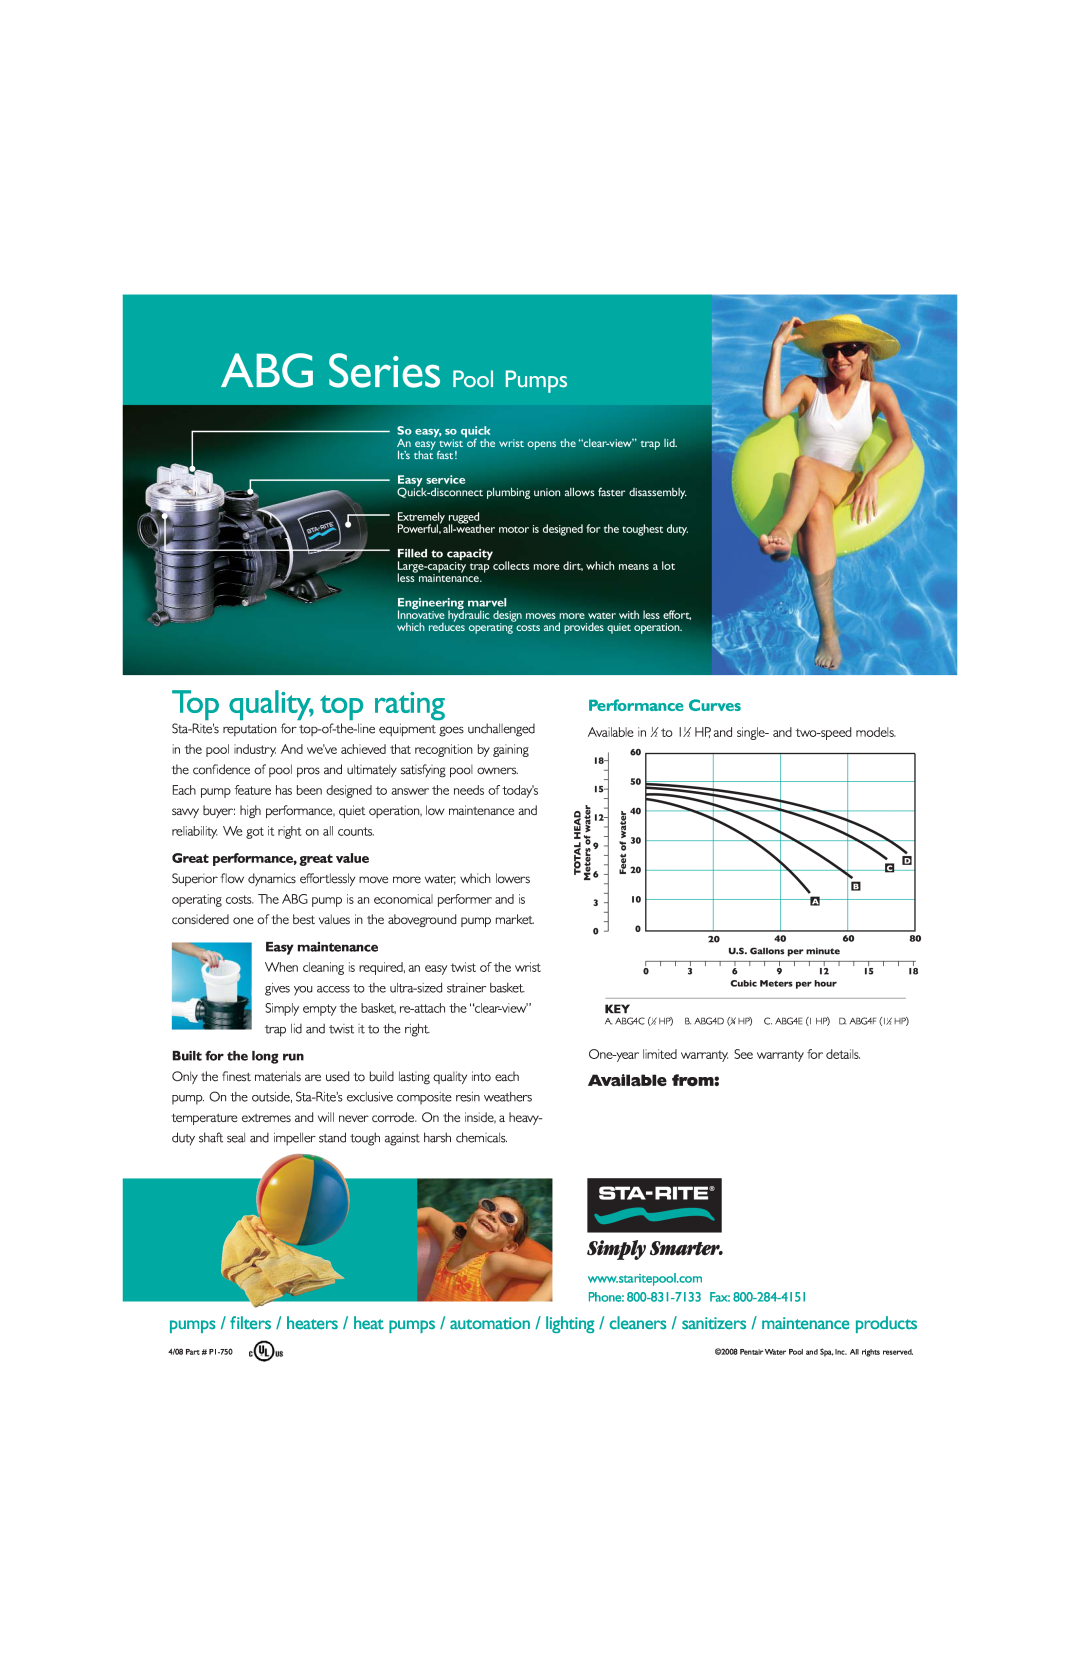 Pentair manual ABG Series Pool Pumps, Top quality, top rating, Performance Curves, Available from, Easy maintenance 